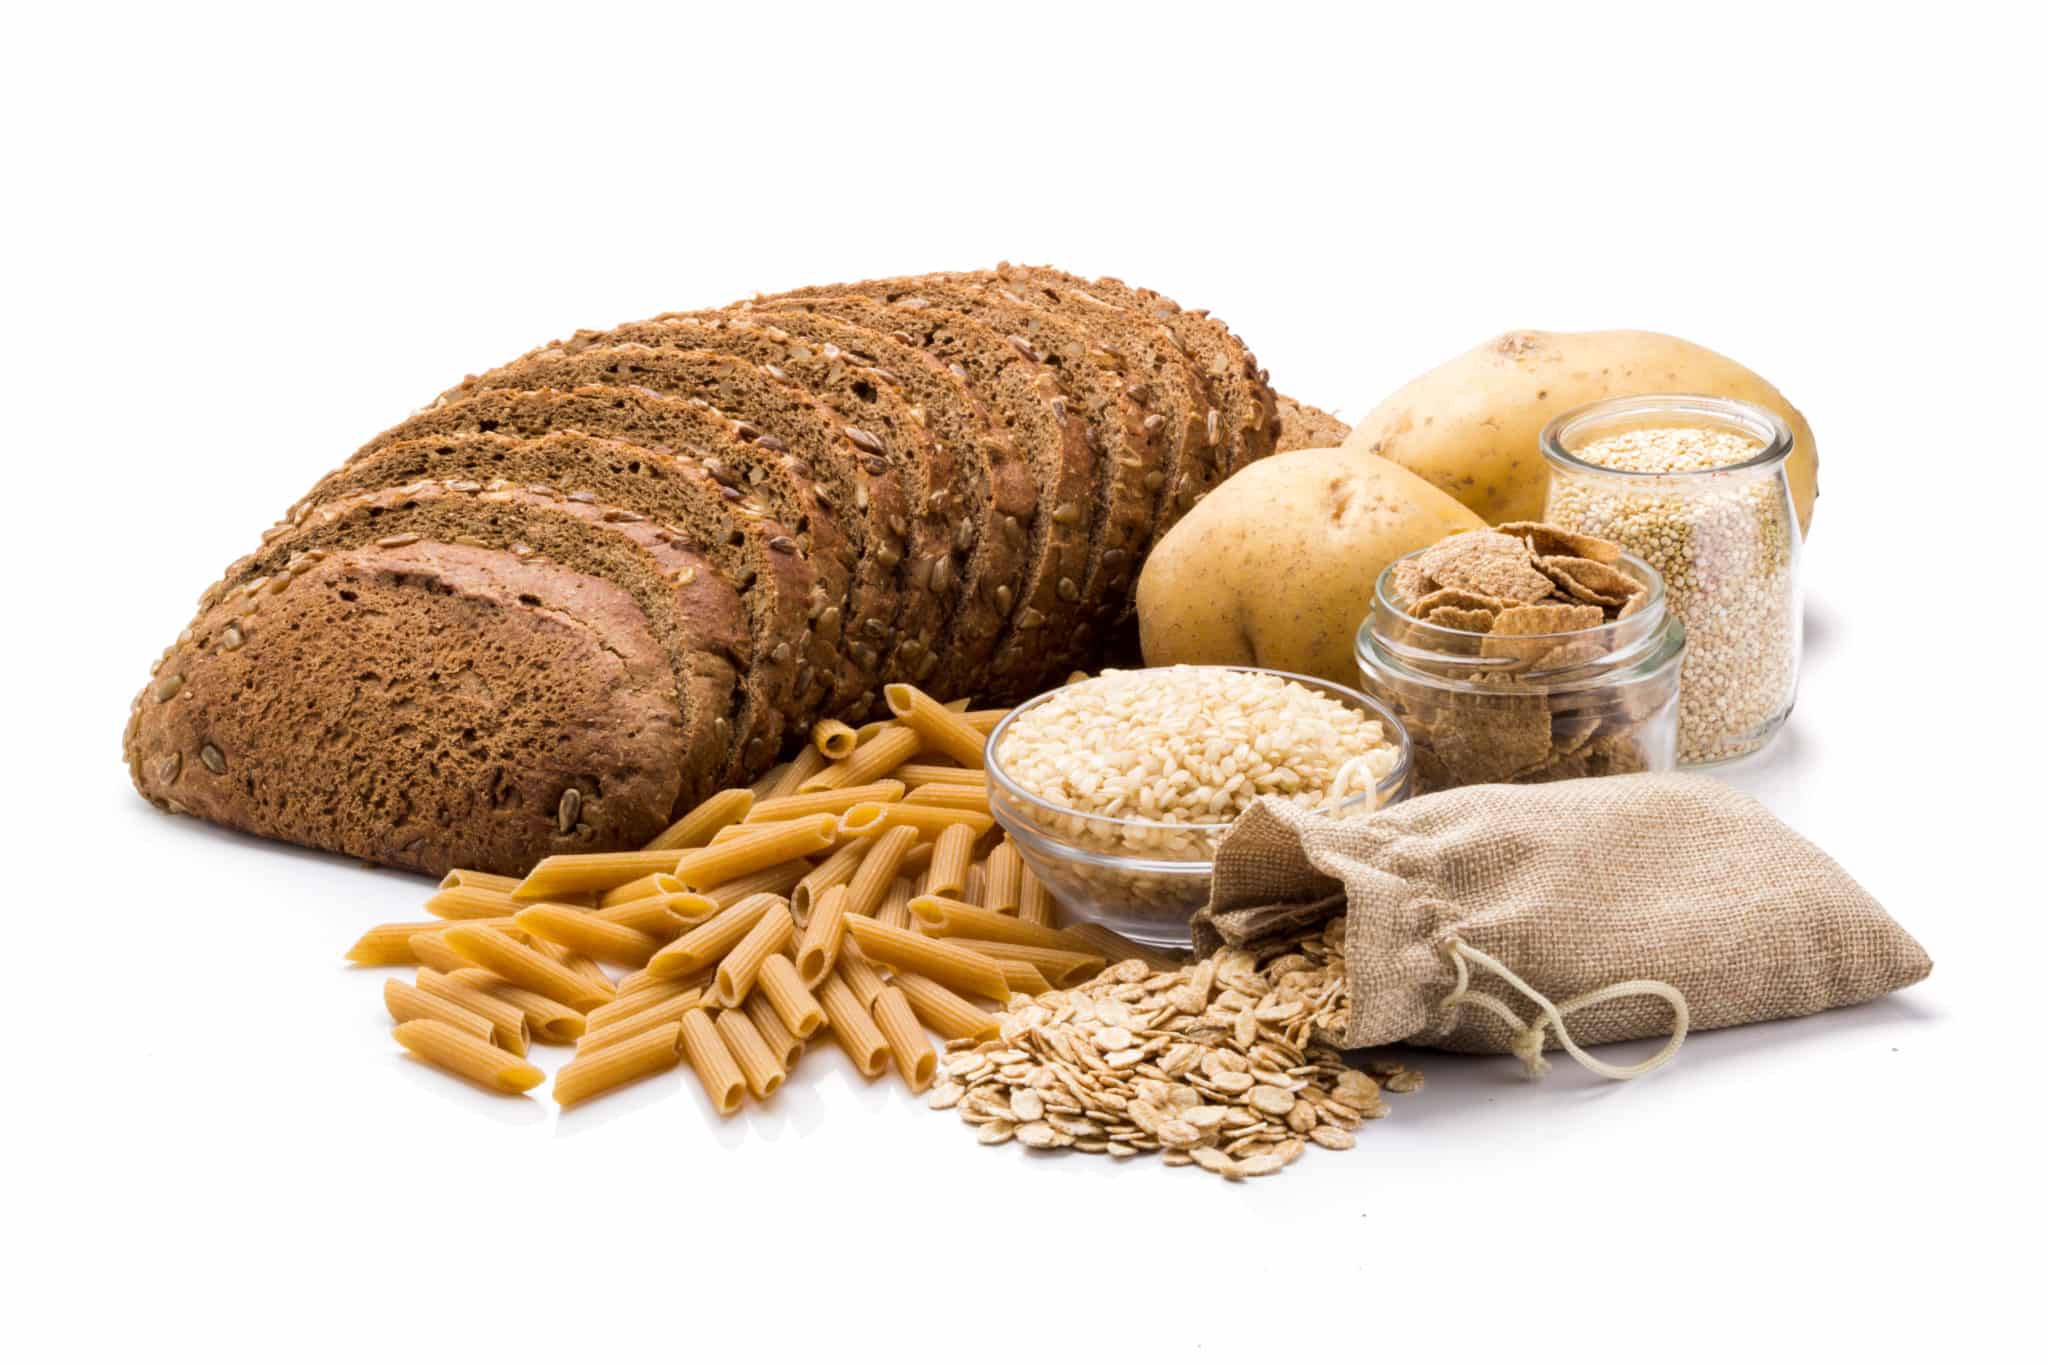 Whole grain bread, pasta, rice, potatoes and bran on white showing carbohydrate options